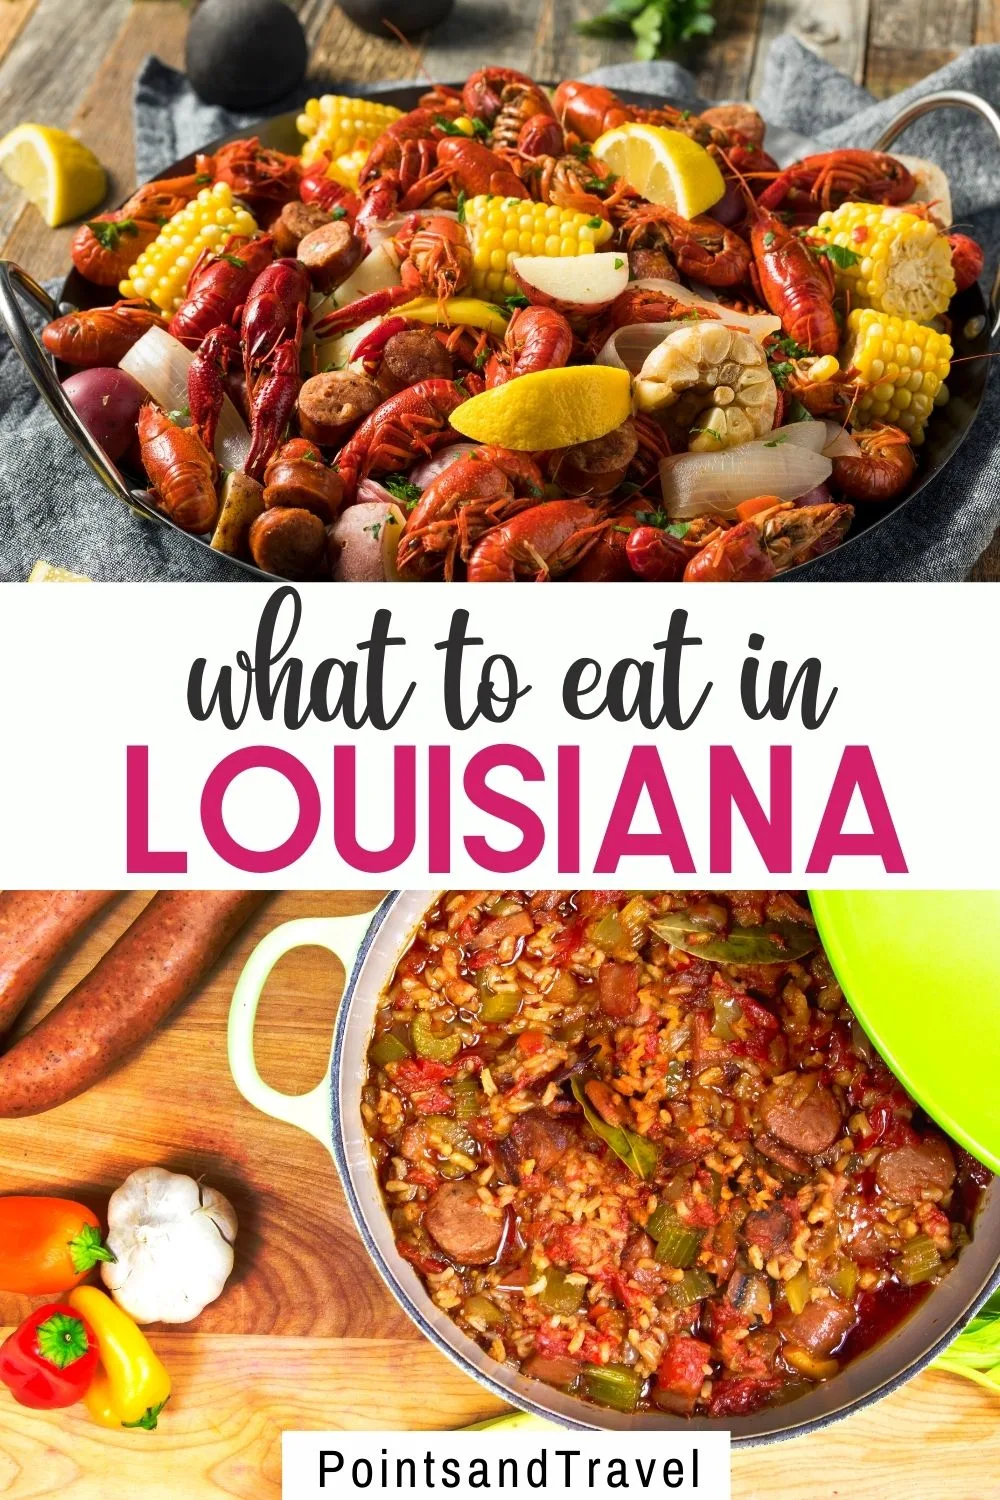 Louisiana's Cajun Foods, Ranked from Worst to Best